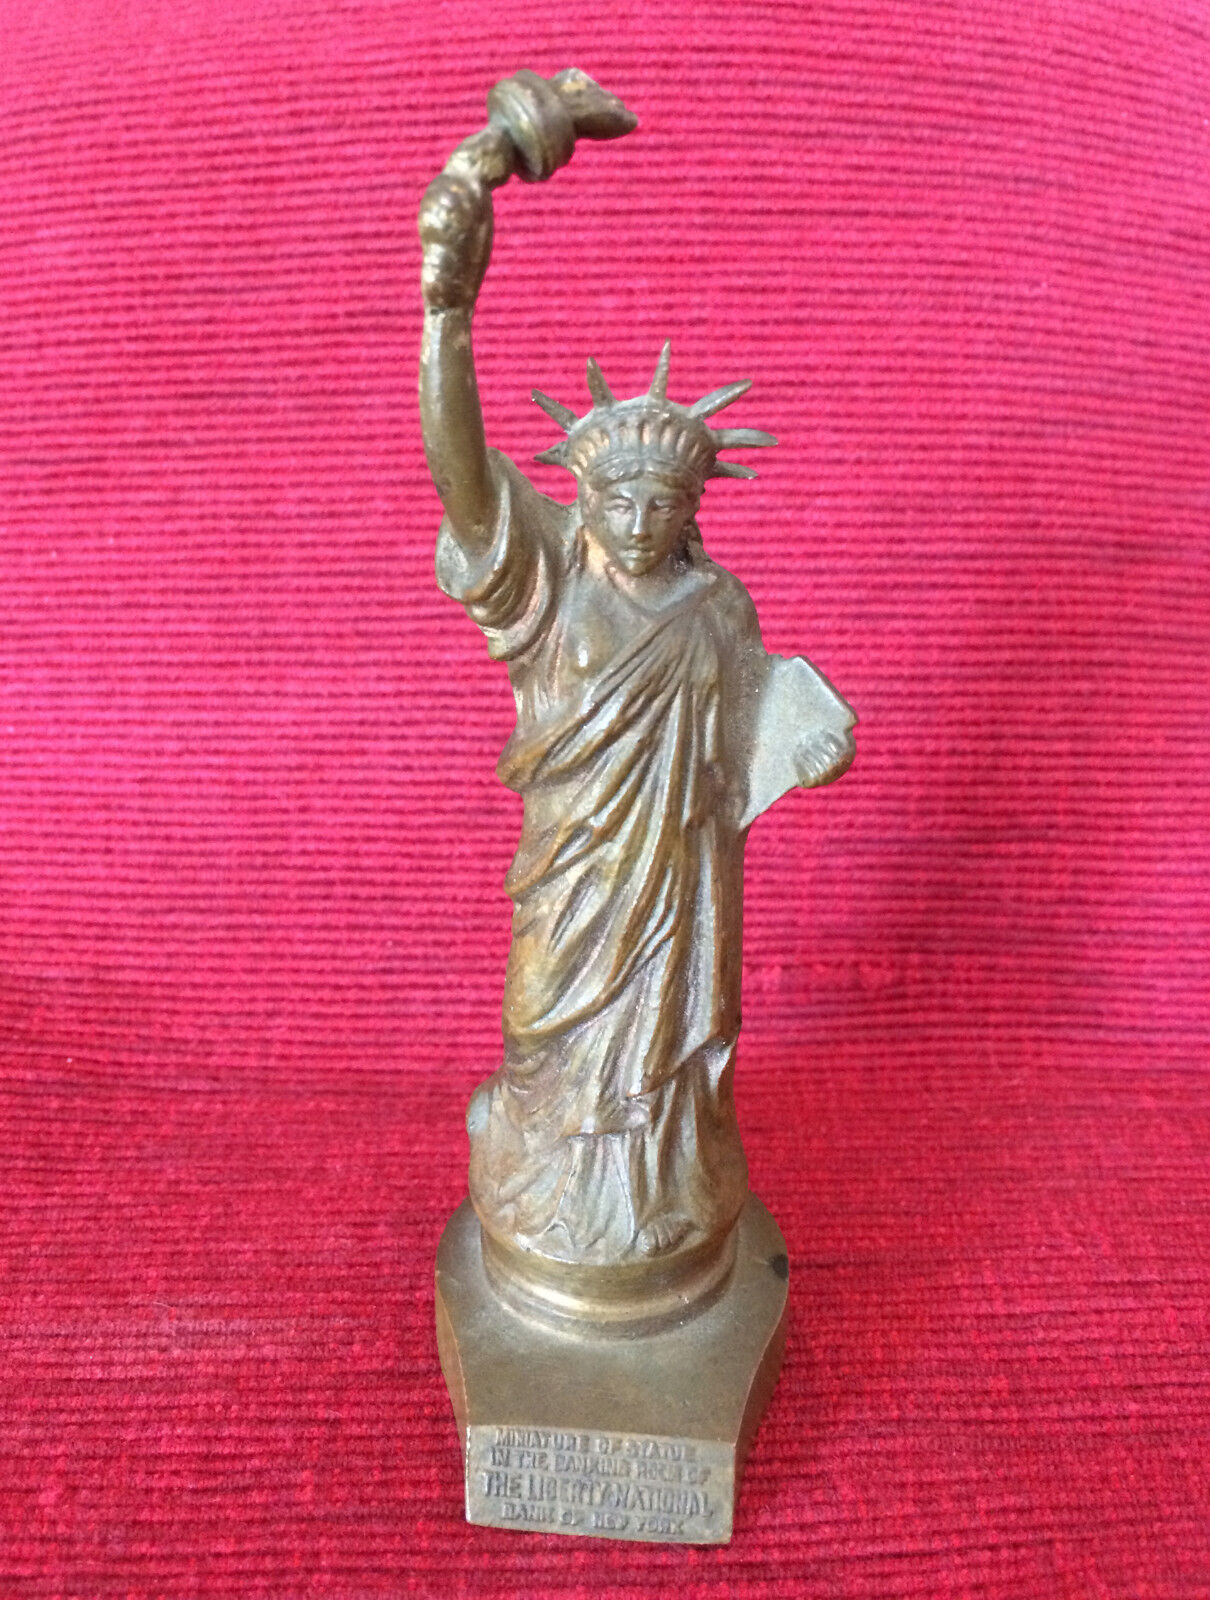 RARE STATUE OF LIBERTY BY GRIFFOUL BRONZE THE LIBERTY NATIONAL BANK NEW YORK